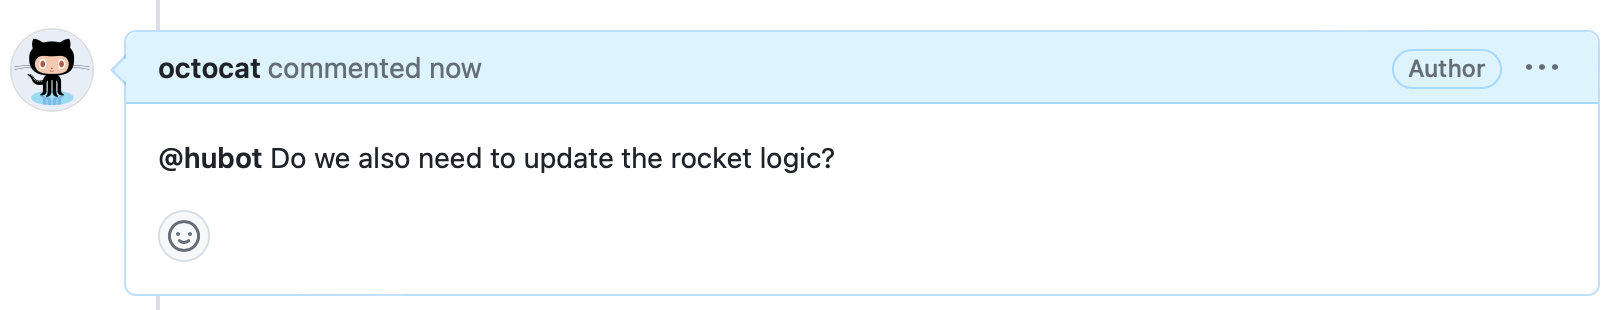 Screenshot of an issue comment. The header says "octocat commented now" and the body says "@hubot Do we also need to update the rocket logic?"